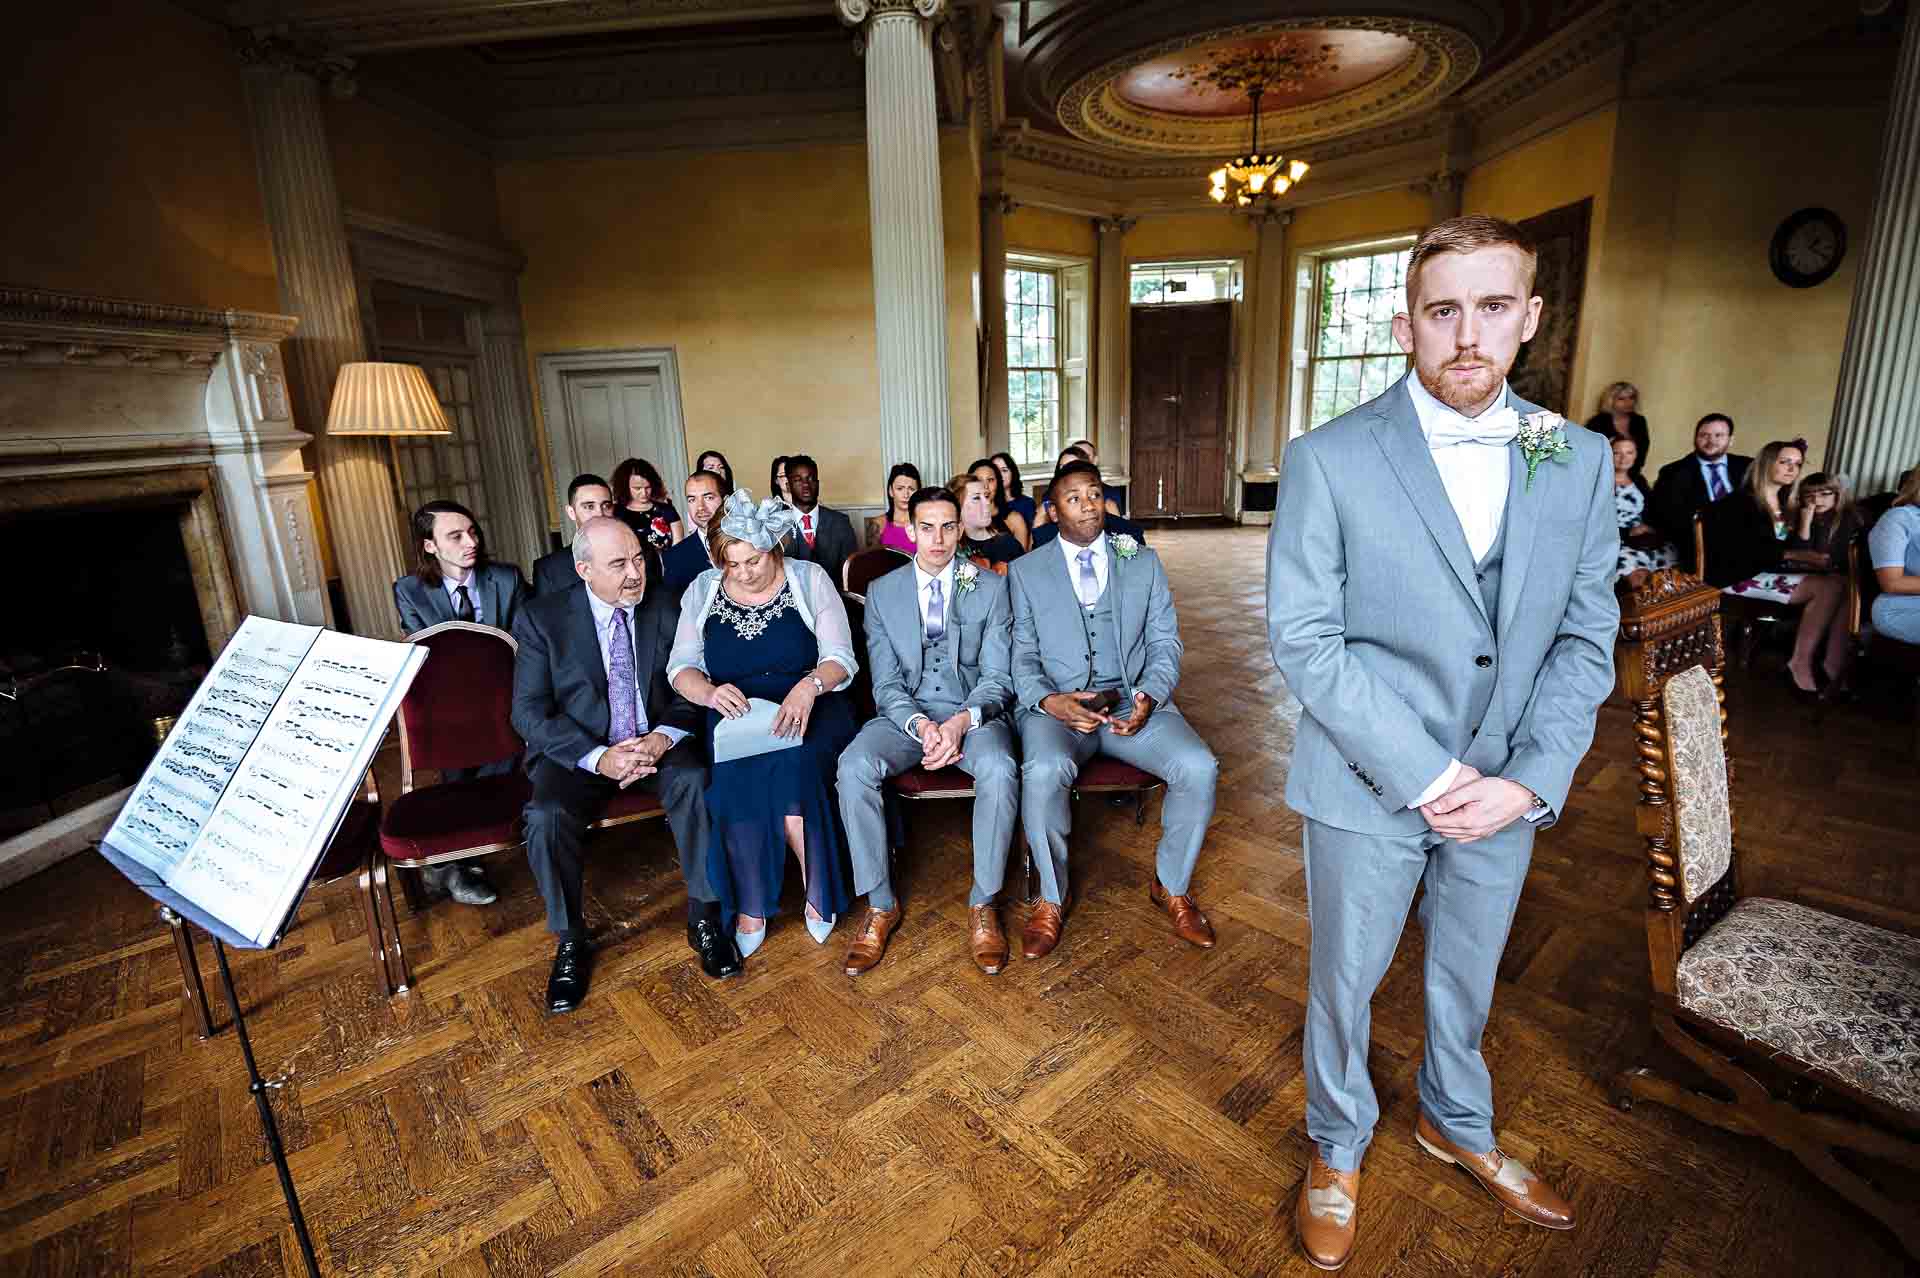 Groom looking serious with guests in background in Grand Hall of Hampton Court House